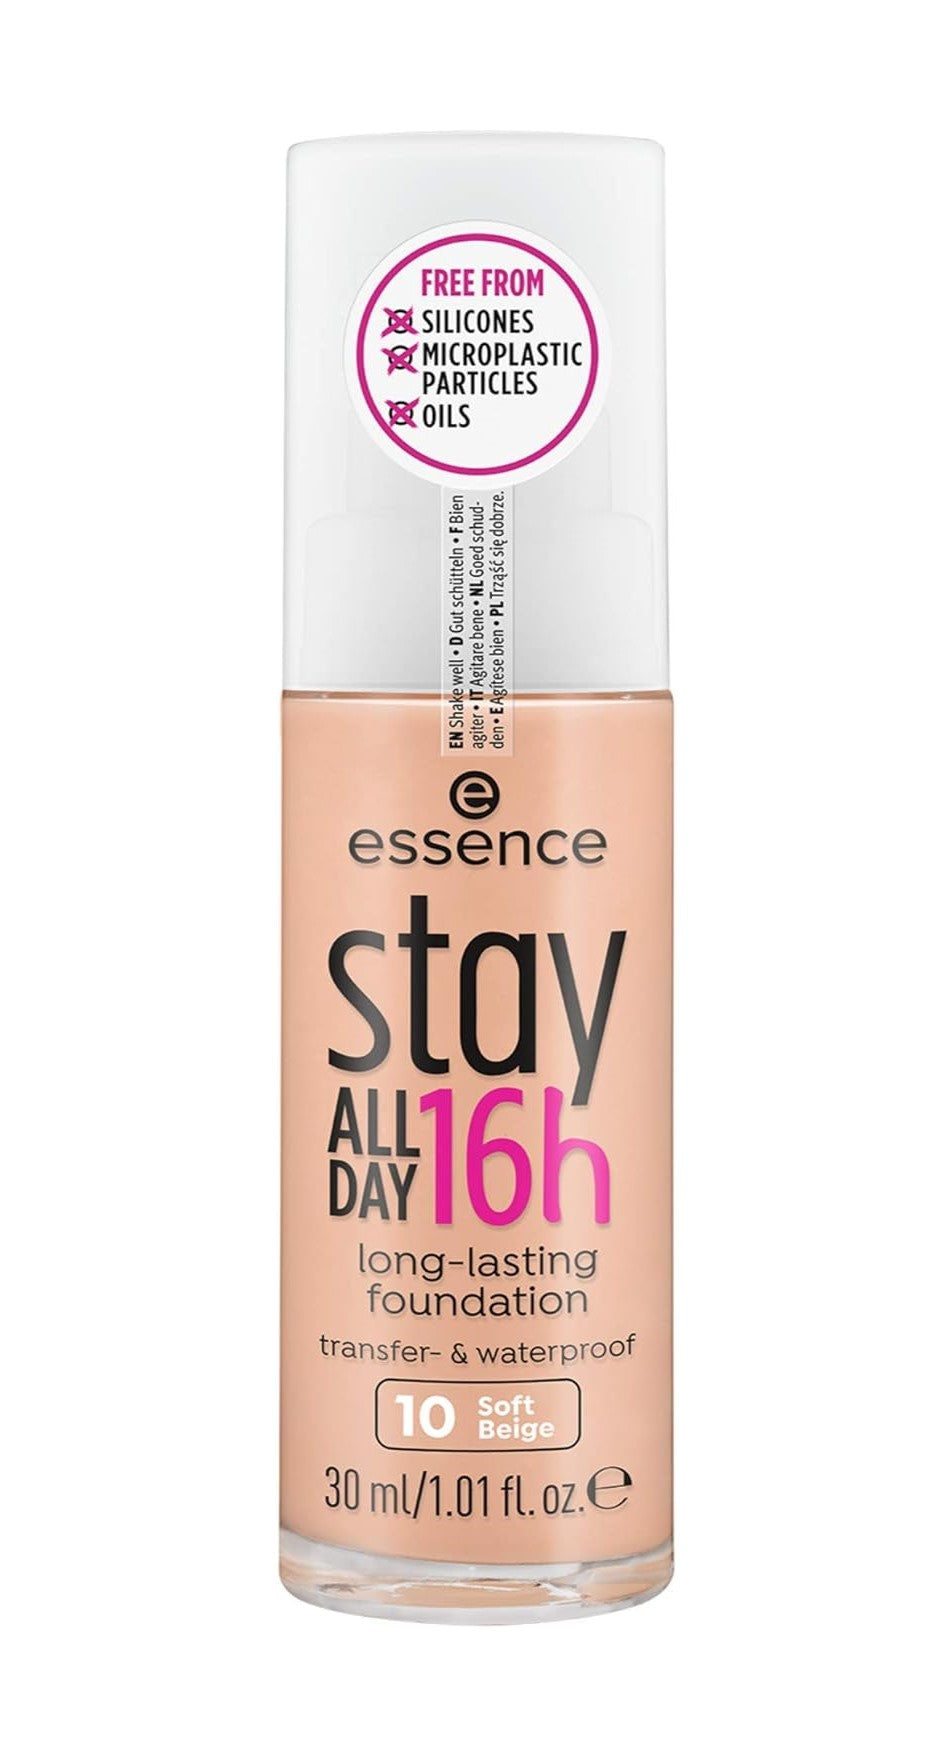 Essence Stay All Day 16H Long-Lasting Make-Up Foundation - 10 Soft Beige